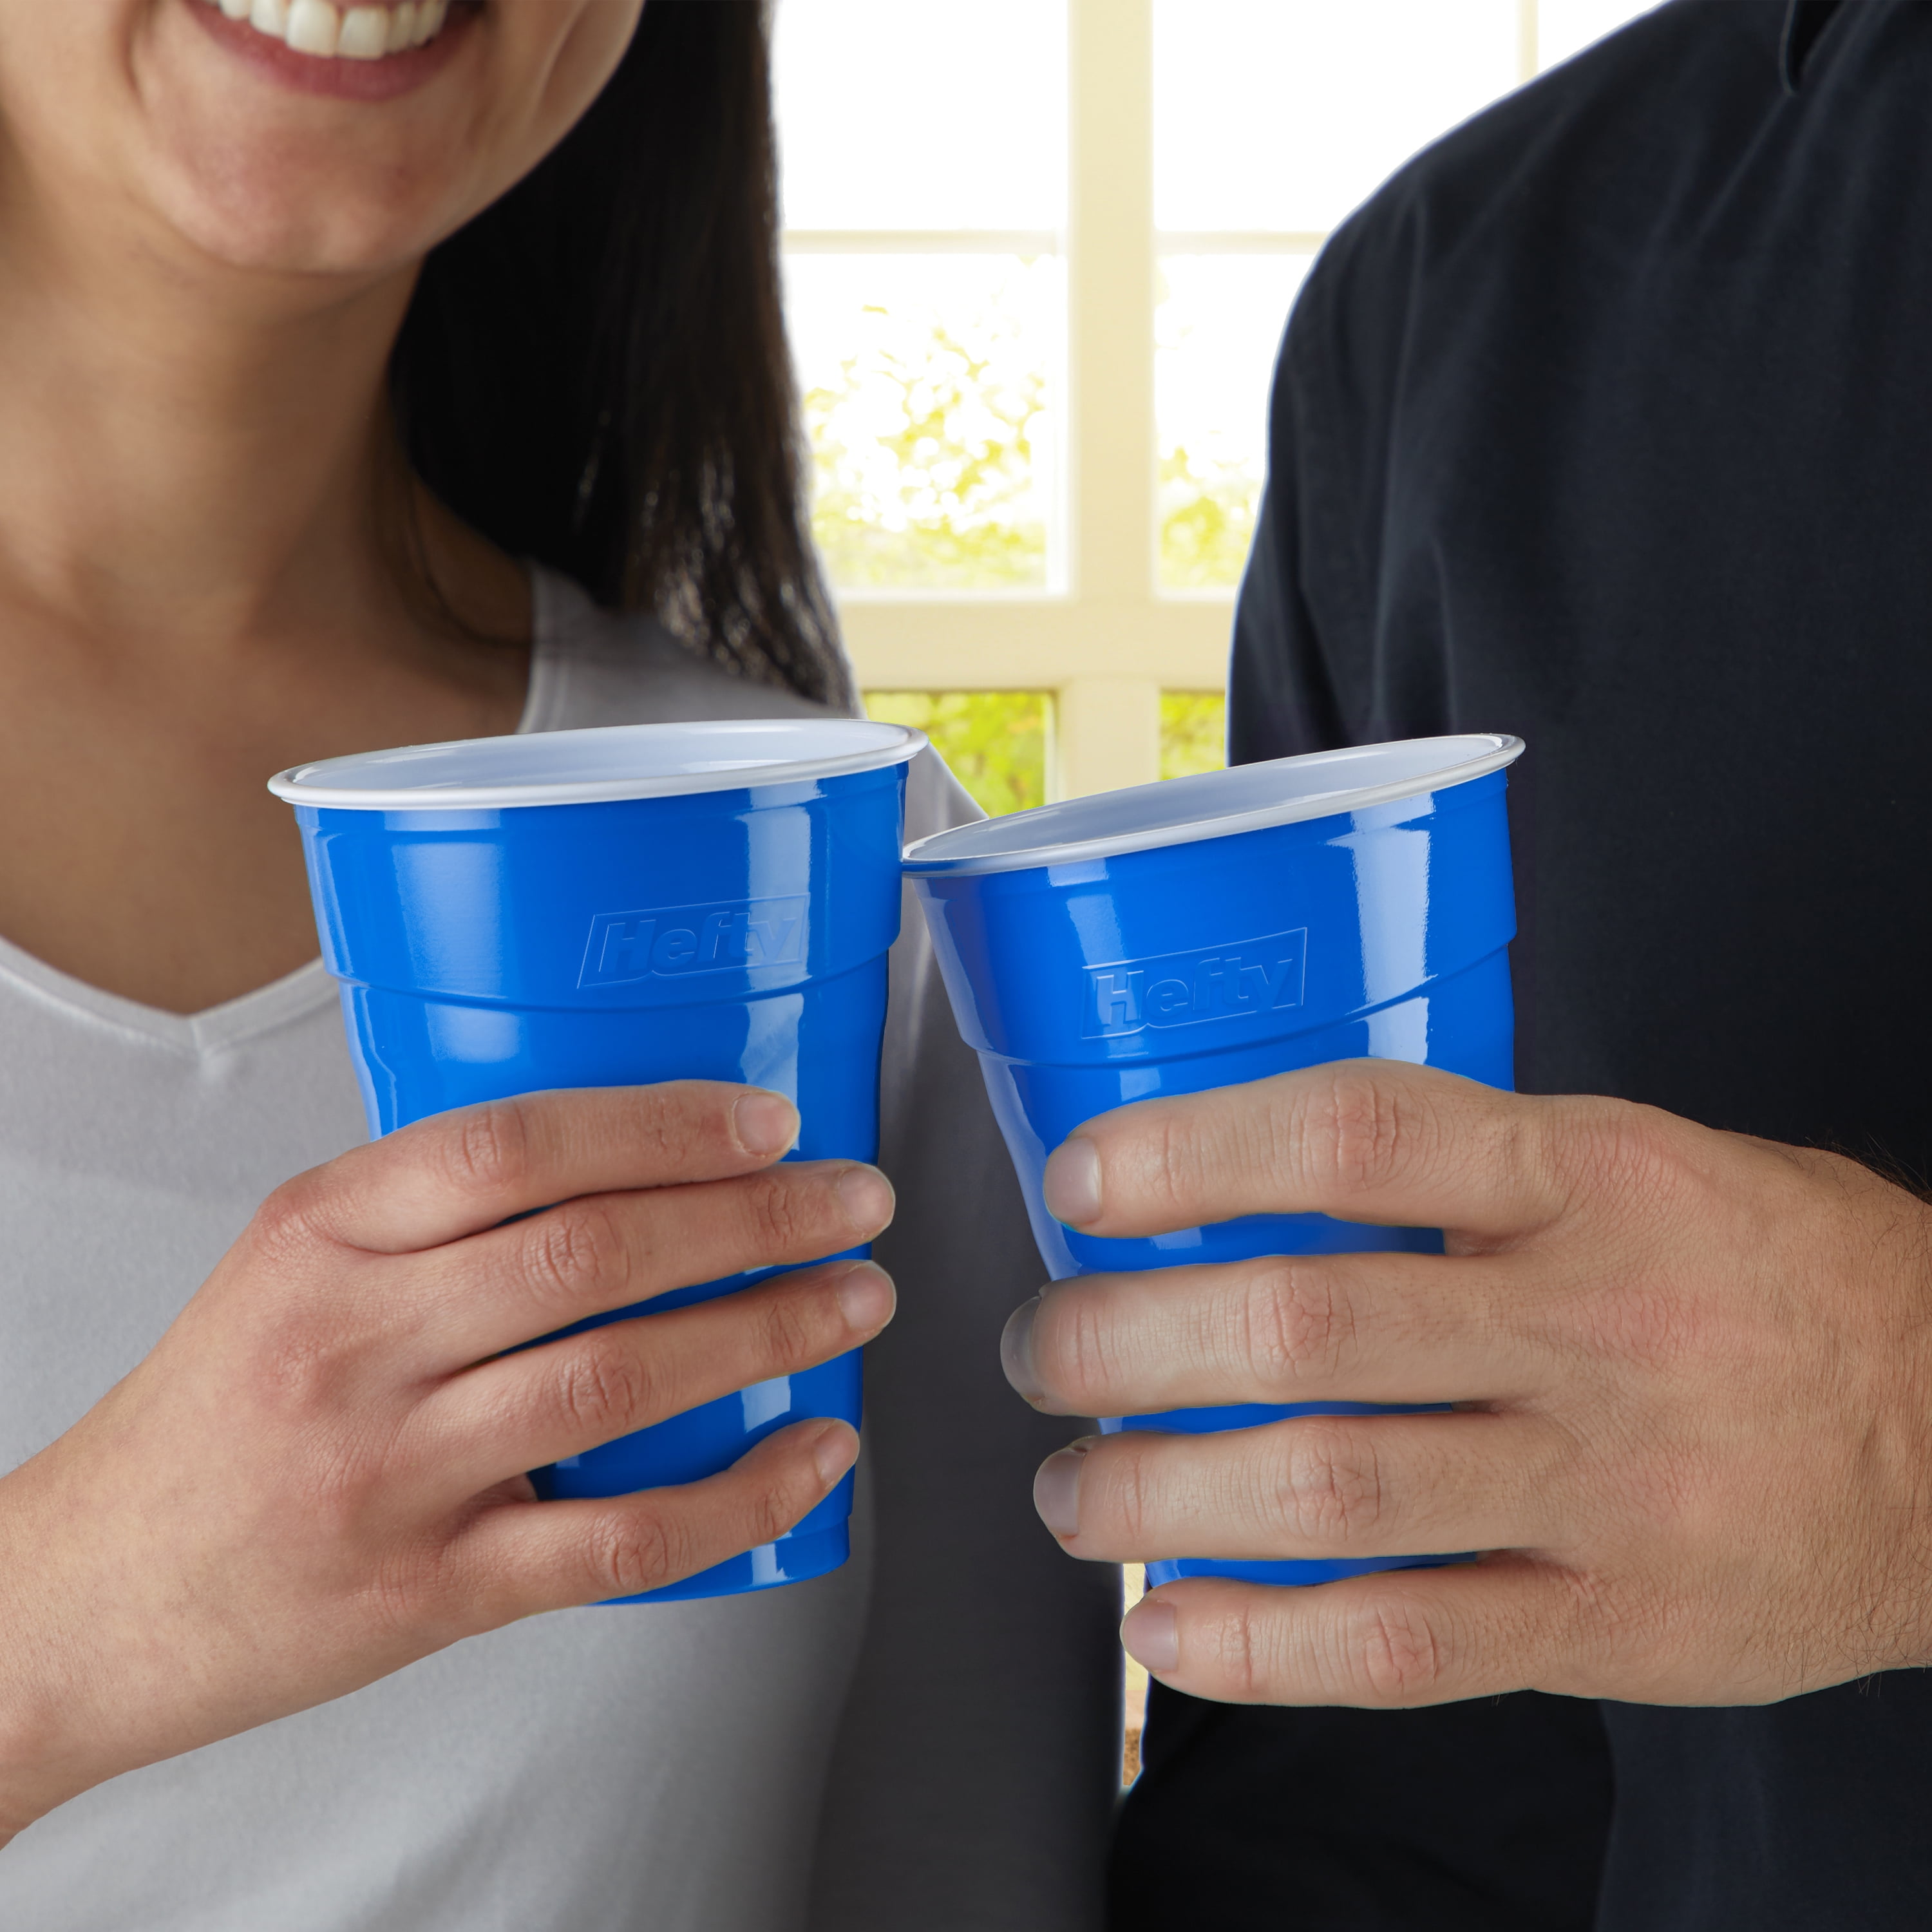 1InTheHome Blue Cups 16 Oz, Disposable Blue Plastic Party Cups (100 pack)